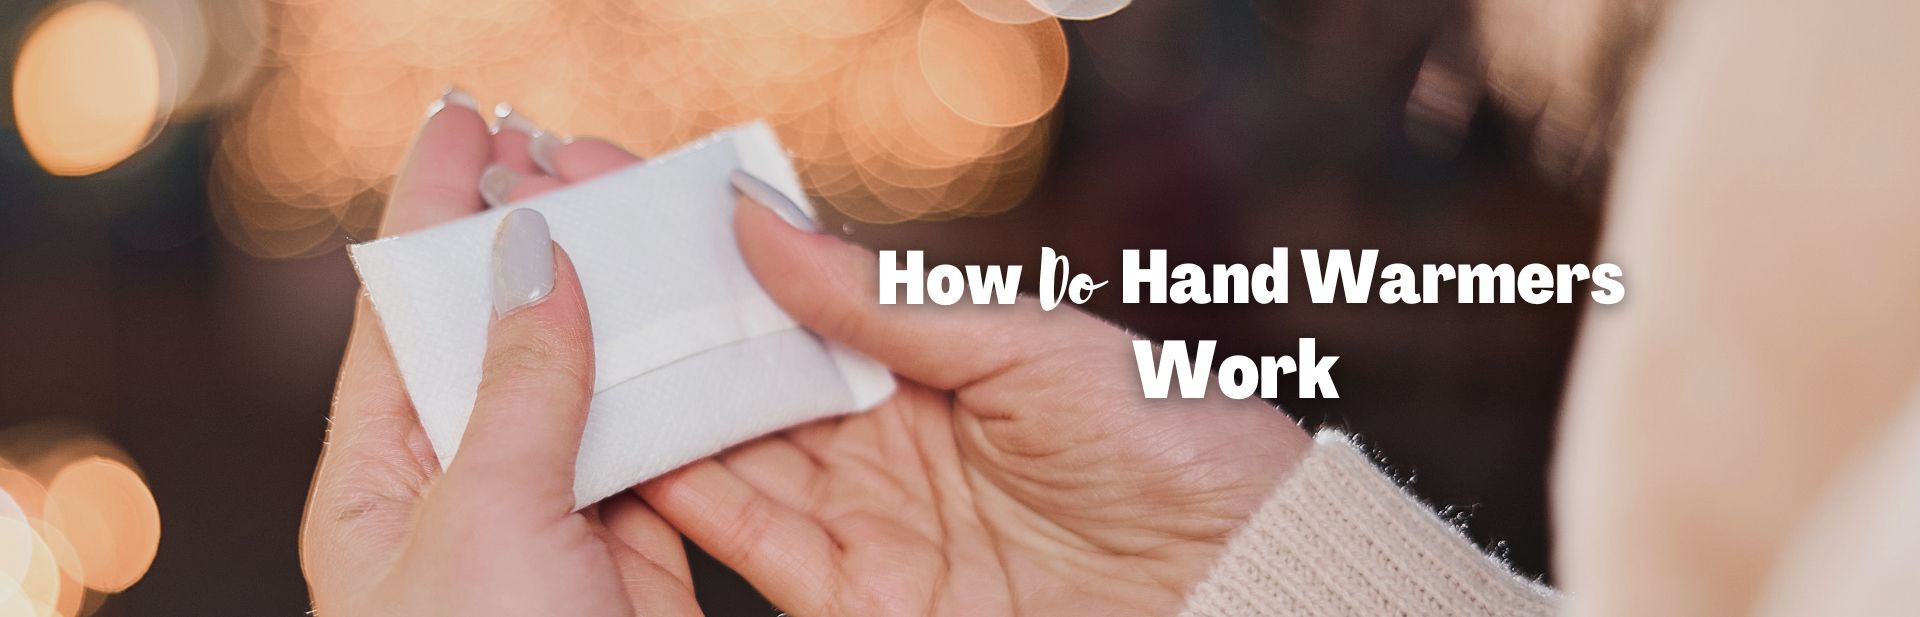 How Do Hand Warmers Work? Exploring The Magic of Chemistry